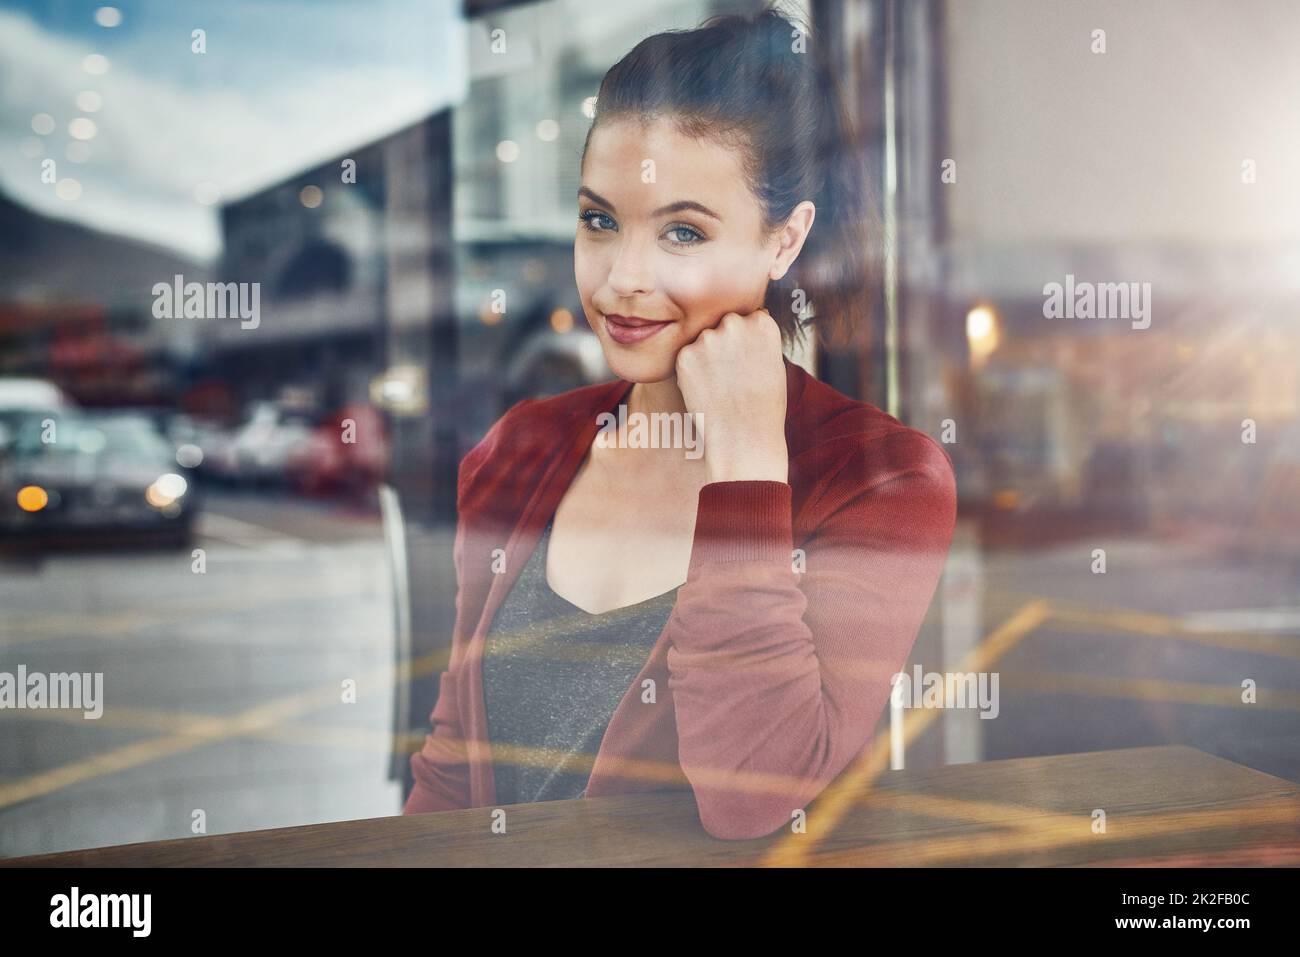 This cafe is a local favorite. Cropped portrait of an attractive young woman sitting in a coffee shop. Stock Photo